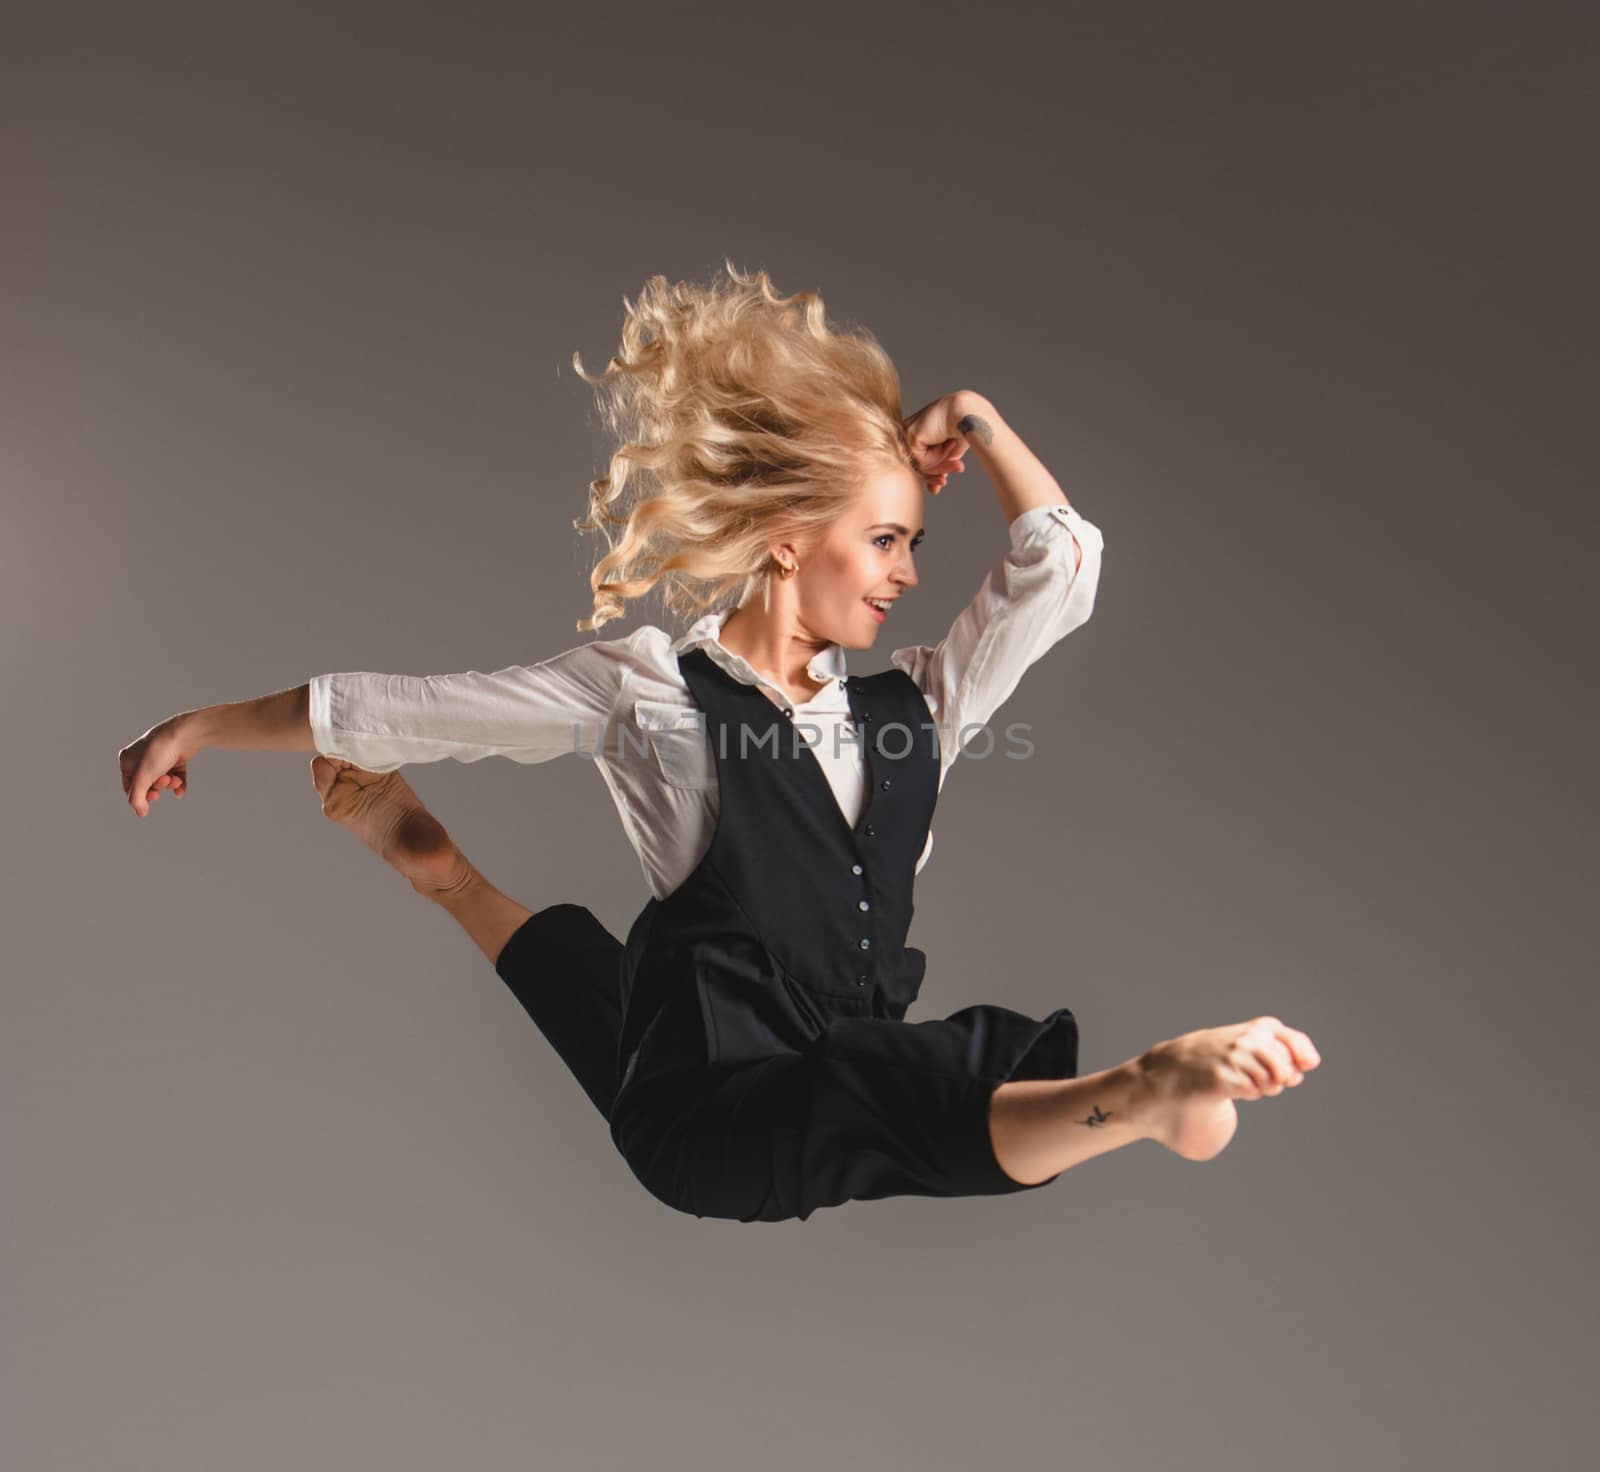 Beauty blond woman in ballet jump by master1305